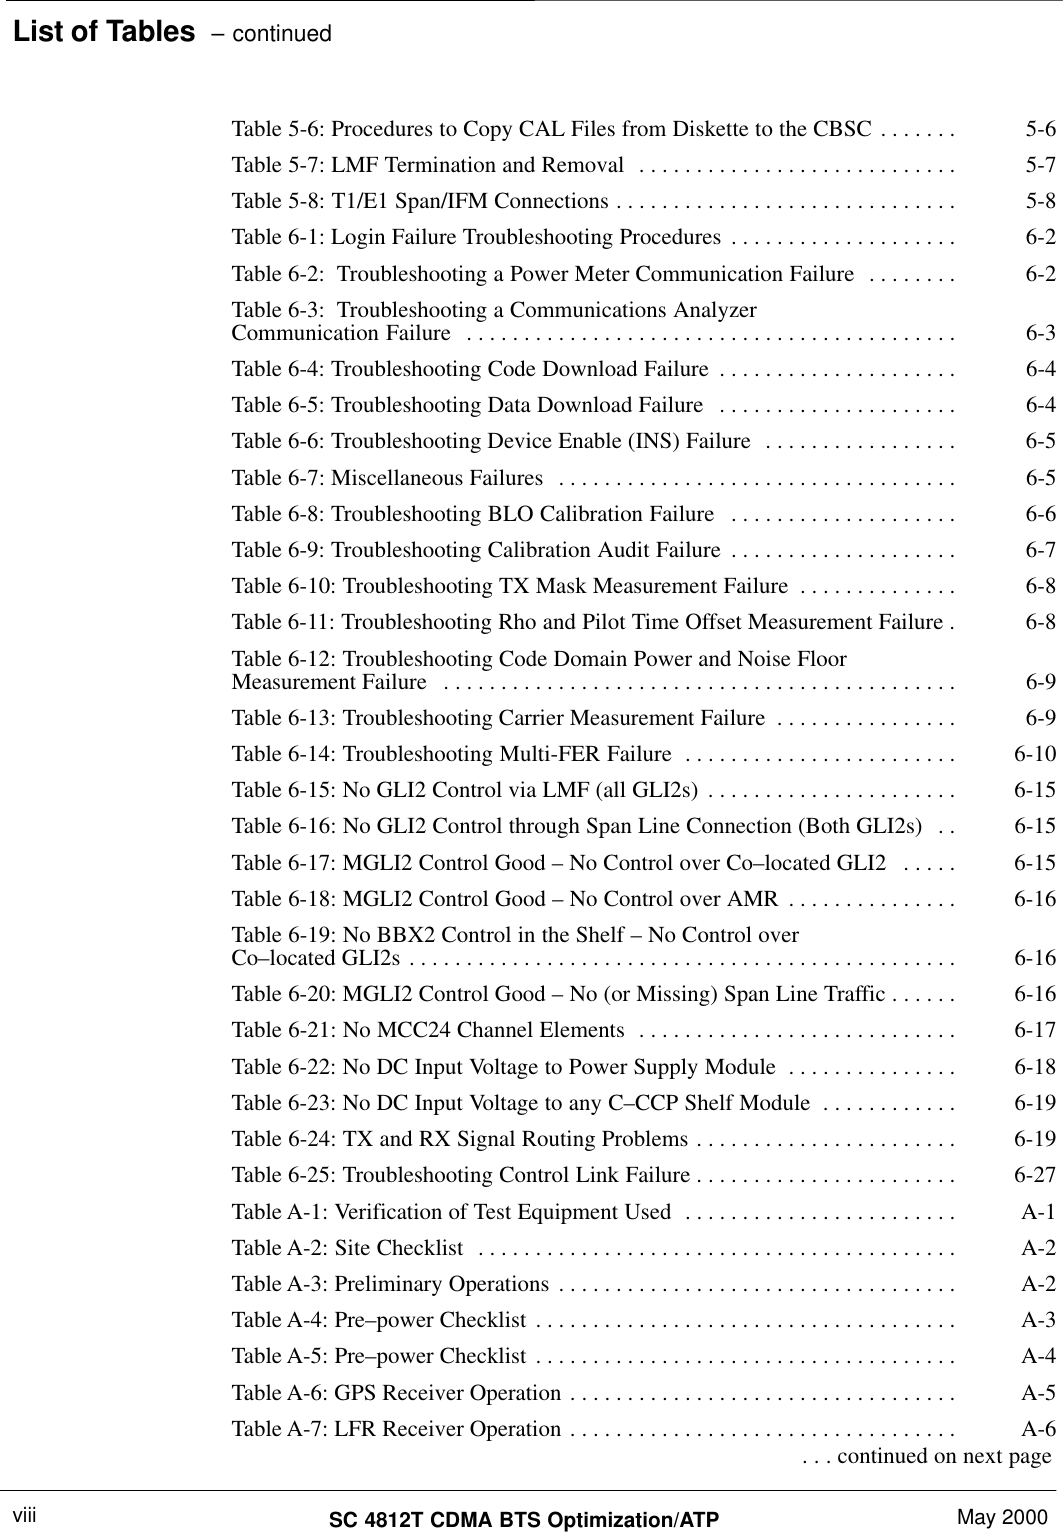 List of Tables  – continuedSC 4812T CDMA BTS Optimization/ATP May 2000viiiTable 5-6: Procedures to Copy CAL Files from Diskette to the CBSC 5-6. . . . . . . Table 5-7: LMF Termination and Removal 5-7. . . . . . . . . . . . . . . . . . . . . . . . . . . . Table 5-8: T1/E1 Span/IFM Connections 5-8. . . . . . . . . . . . . . . . . . . . . . . . . . . . . . Table 6-1: Login Failure Troubleshooting Procedures 6-2. . . . . . . . . . . . . . . . . . . . Table 6-2:  Troubleshooting a Power Meter Communication Failure 6-2. . . . . . . . Table 6-3:  Troubleshooting a Communications AnalyzerCommunication Failure 6-3. . . . . . . . . . . . . . . . . . . . . . . . . . . . . . . . . . . . . . . . . . . Table 6-4: Troubleshooting Code Download Failure 6-4. . . . . . . . . . . . . . . . . . . . . Table 6-5: Troubleshooting Data Download Failure 6-4. . . . . . . . . . . . . . . . . . . . . Table 6-6: Troubleshooting Device Enable (INS) Failure 6-5. . . . . . . . . . . . . . . . . Table 6-7: Miscellaneous Failures 6-5. . . . . . . . . . . . . . . . . . . . . . . . . . . . . . . . . . . Table 6-8: Troubleshooting BLO Calibration Failure 6-6. . . . . . . . . . . . . . . . . . . . Table 6-9: Troubleshooting Calibration Audit Failure 6-7. . . . . . . . . . . . . . . . . . . . Table 6-10: Troubleshooting TX Mask Measurement Failure 6-8. . . . . . . . . . . . . . Table 6-11: Troubleshooting Rho and Pilot Time Offset Measurement Failure 6-8. Table 6-12: Troubleshooting Code Domain Power and Noise FloorMeasurement Failure 6-9. . . . . . . . . . . . . . . . . . . . . . . . . . . . . . . . . . . . . . . . . . . . . Table 6-13: Troubleshooting Carrier Measurement Failure 6-9. . . . . . . . . . . . . . . . Table 6-14: Troubleshooting Multi-FER Failure 6-10. . . . . . . . . . . . . . . . . . . . . . . . Table 6-15: No GLI2 Control via LMF (all GLI2s) 6-15. . . . . . . . . . . . . . . . . . . . . . Table 6-16: No GLI2 Control through Span Line Connection (Both GLI2s) 6-15. . Table 6-17: MGLI2 Control Good – No Control over Co–located GLI2 6-15. . . . . Table 6-18: MGLI2 Control Good – No Control over AMR 6-16. . . . . . . . . . . . . . . Table 6-19: No BBX2 Control in the Shelf – No Control overCo–located GLI2s 6-16. . . . . . . . . . . . . . . . . . . . . . . . . . . . . . . . . . . . . . . . . . . . . . . . Table 6-20: MGLI2 Control Good – No (or Missing) Span Line Traffic 6-16. . . . . . Table 6-21: No MCC24 Channel Elements 6-17. . . . . . . . . . . . . . . . . . . . . . . . . . . . Table 6-22: No DC Input Voltage to Power Supply Module 6-18. . . . . . . . . . . . . . . Table 6-23: No DC Input Voltage to any C–CCP Shelf Module 6-19. . . . . . . . . . . . Table 6-24: TX and RX Signal Routing Problems 6-19. . . . . . . . . . . . . . . . . . . . . . . Table 6-25: Troubleshooting Control Link Failure 6-27. . . . . . . . . . . . . . . . . . . . . . . Table A-1: Verification of Test Equipment Used A-1. . . . . . . . . . . . . . . . . . . . . . . . Table A-2: Site Checklist A-2. . . . . . . . . . . . . . . . . . . . . . . . . . . . . . . . . . . . . . . . . . Table A-3: Preliminary Operations A-2. . . . . . . . . . . . . . . . . . . . . . . . . . . . . . . . . . . Table A-4: Pre–power Checklist A-3. . . . . . . . . . . . . . . . . . . . . . . . . . . . . . . . . . . . . Table A-5: Pre–power Checklist A-4. . . . . . . . . . . . . . . . . . . . . . . . . . . . . . . . . . . . . Table A-6: GPS Receiver Operation A-5. . . . . . . . . . . . . . . . . . . . . . . . . . . . . . . . . . Table A-7: LFR Receiver Operation A-6. . . . . . . . . . . . . . . . . . . . . . . . . . . . . . . . . .  . . . continued on next page